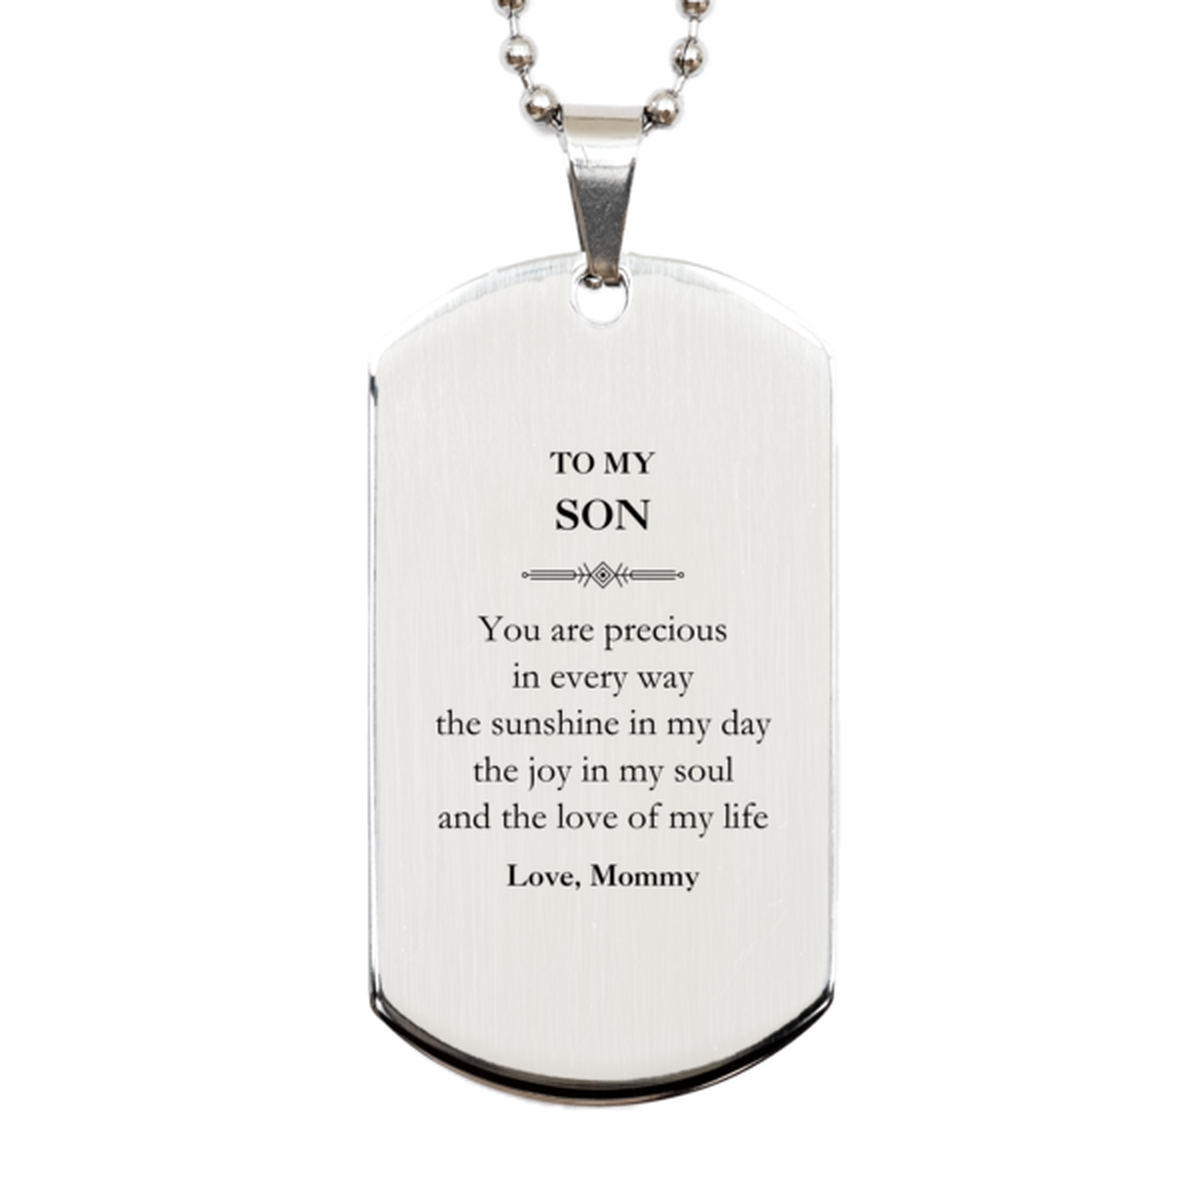 Graduation Gifts for Son Silver Dog Tag Present from Mommy, Christmas Son Birthday Gifts Son You are precious in every way the sunshine in my day. Love, Mommy